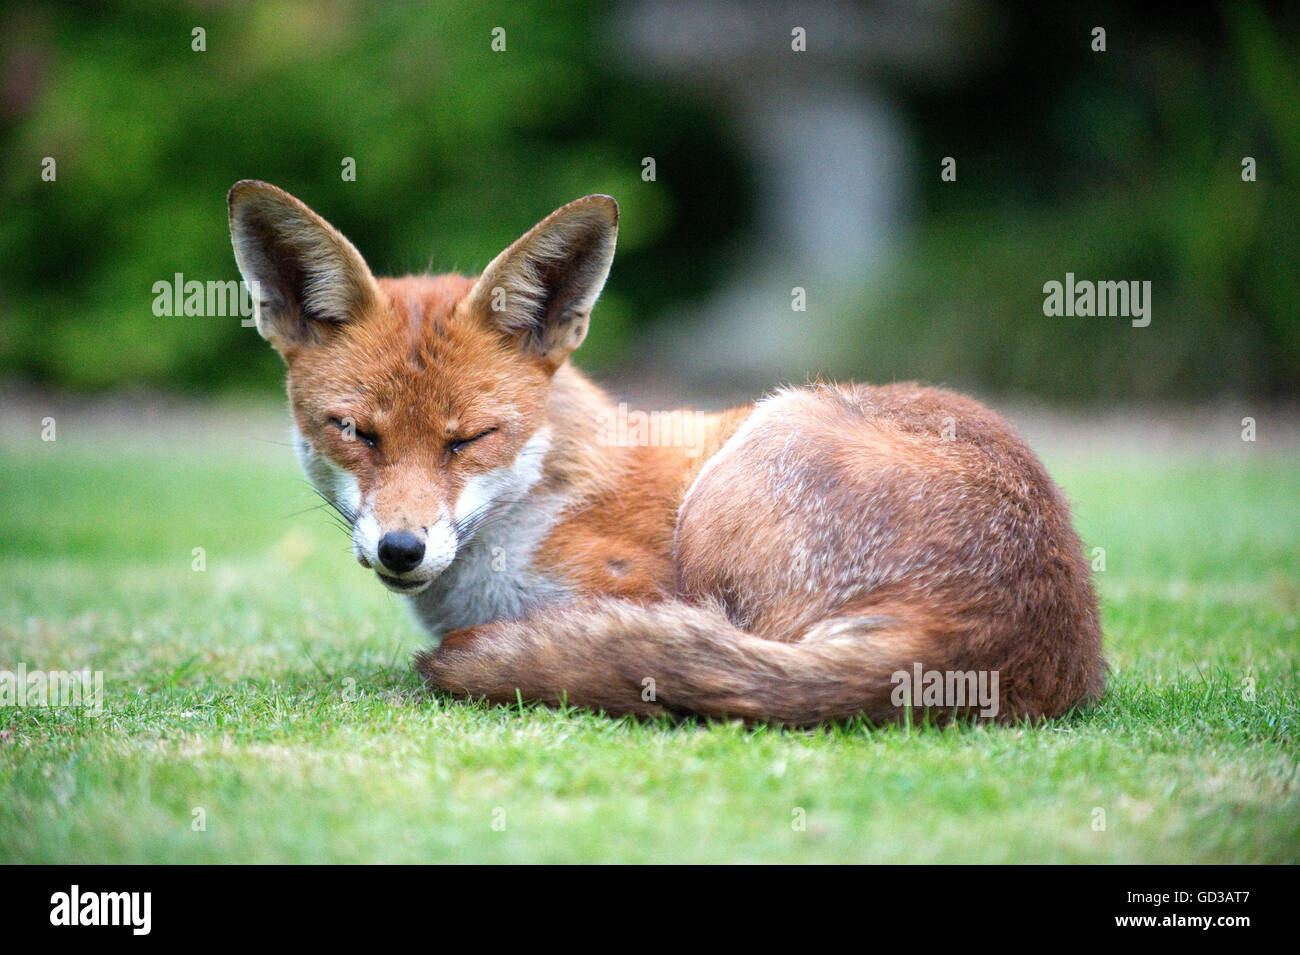 Fox curled up on grass facing the viewer, eyes shut, ears alert. Stock Photo